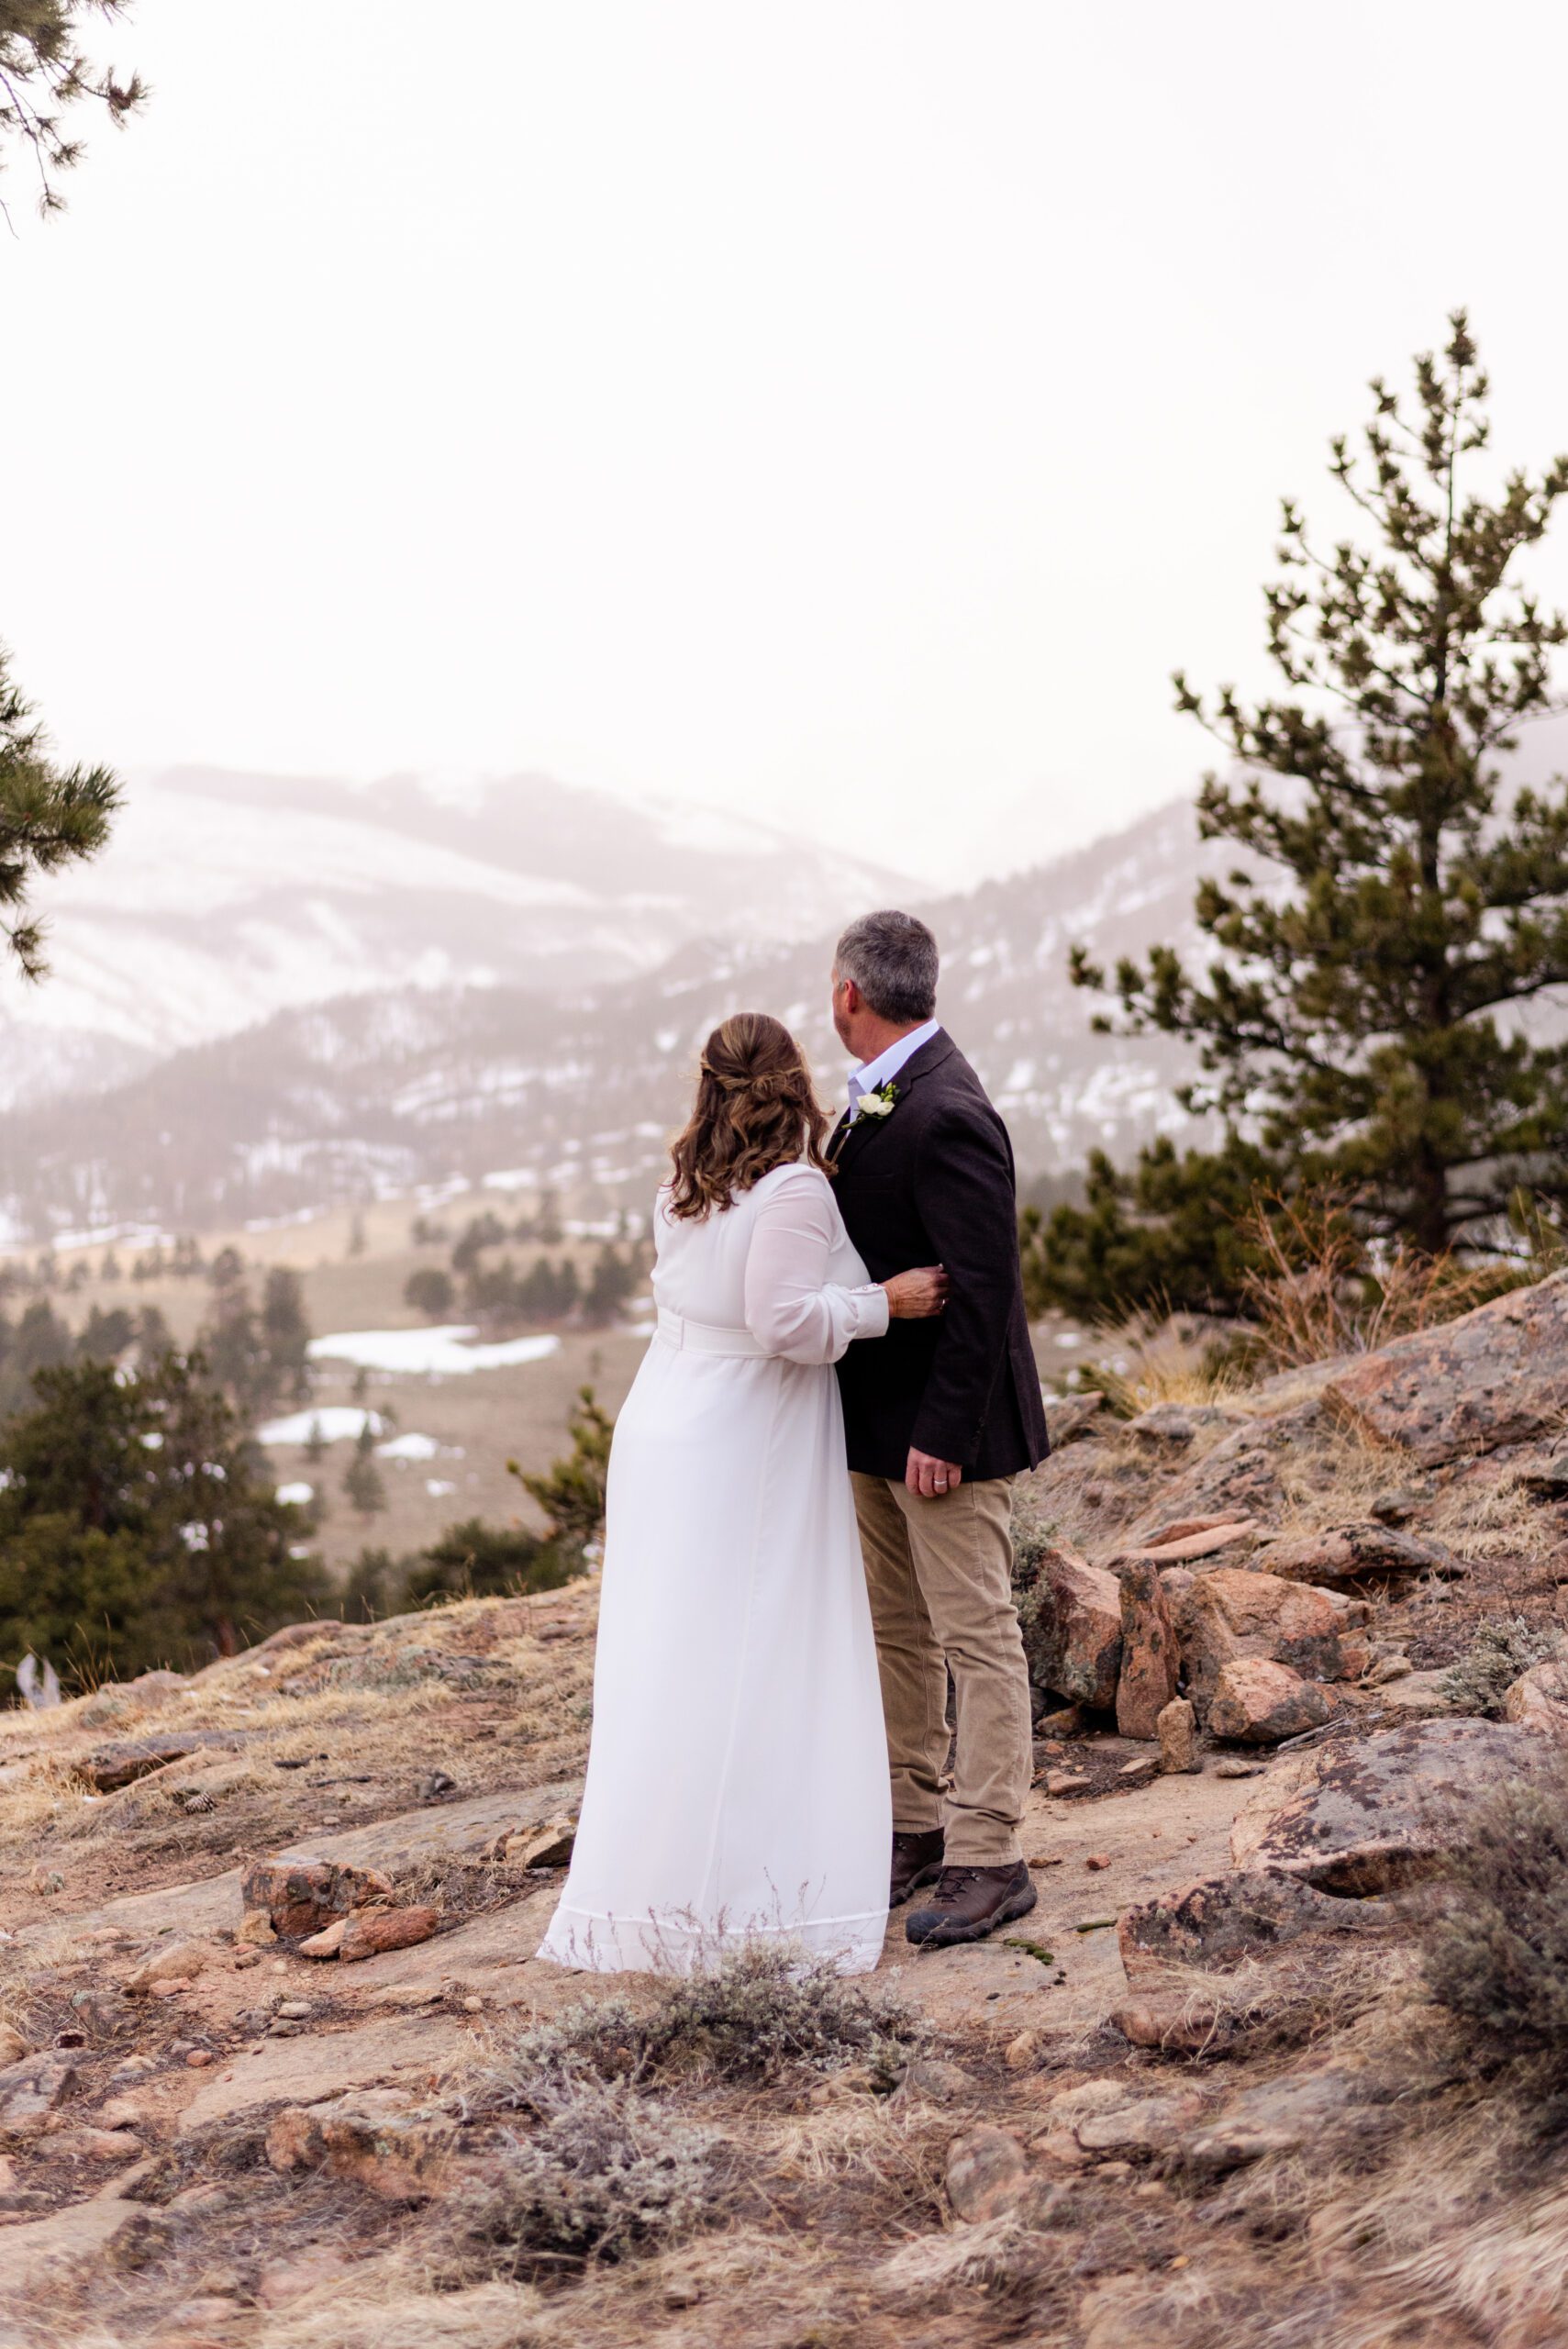 the bride and groom look out on the snowy mountain top during their spring elopement at 3M Curve.